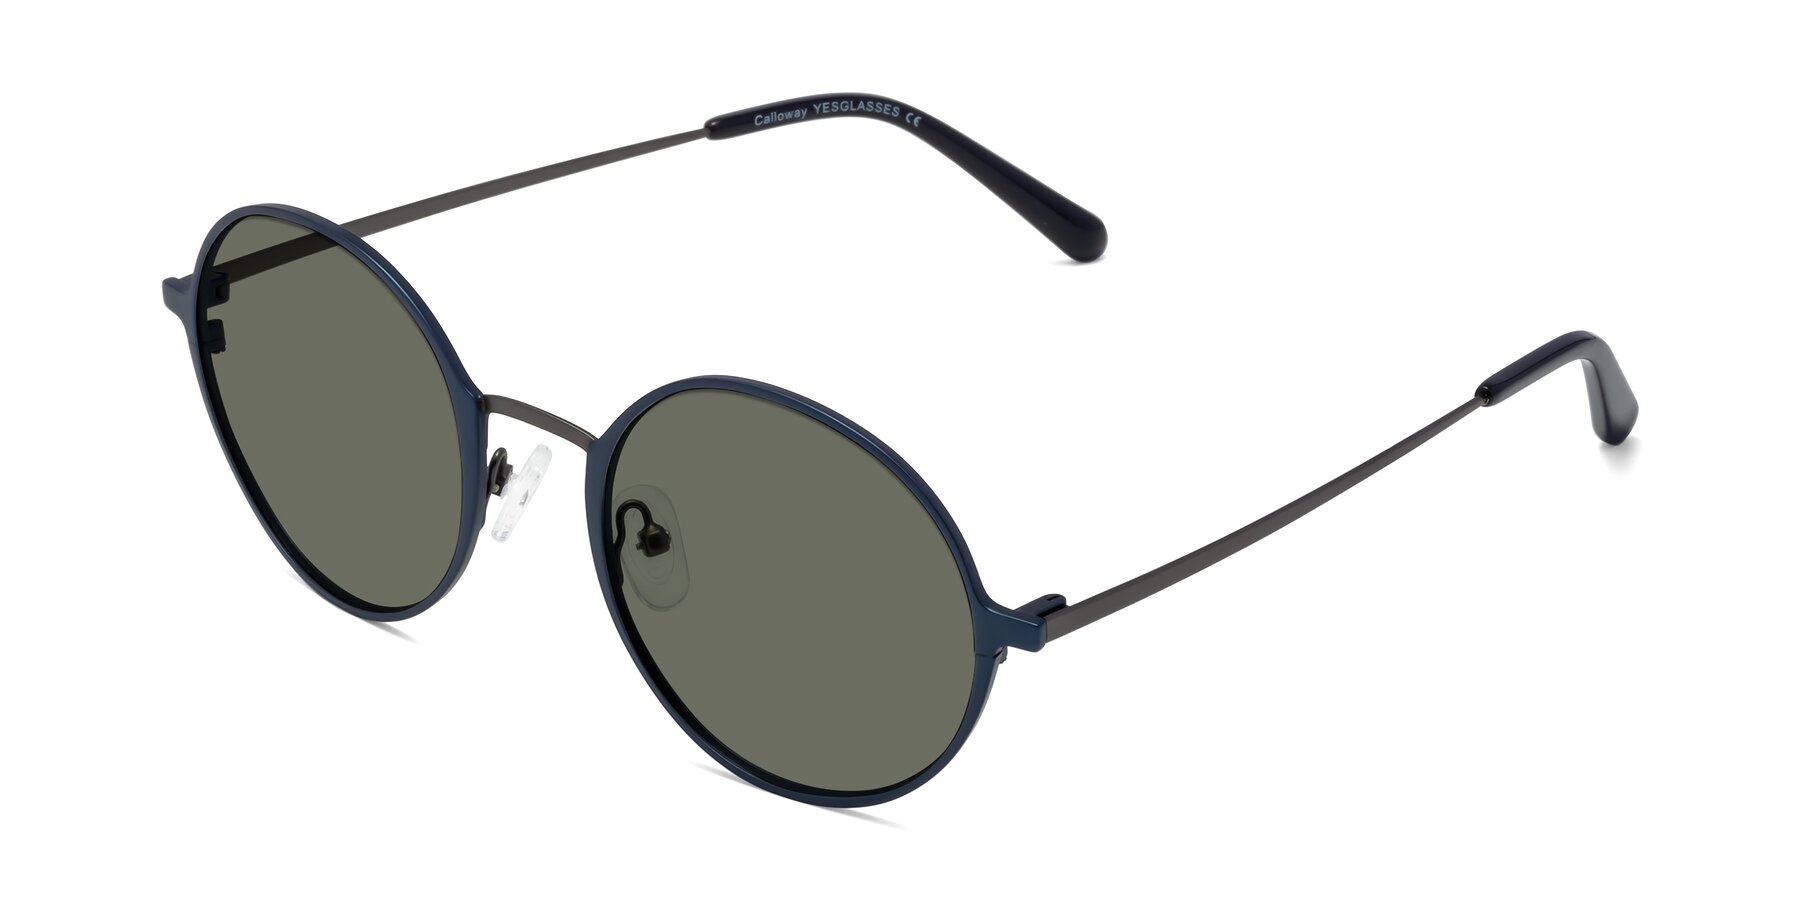 Angle of Calloway in Navy-Gunmetal with Gray Polarized Lenses